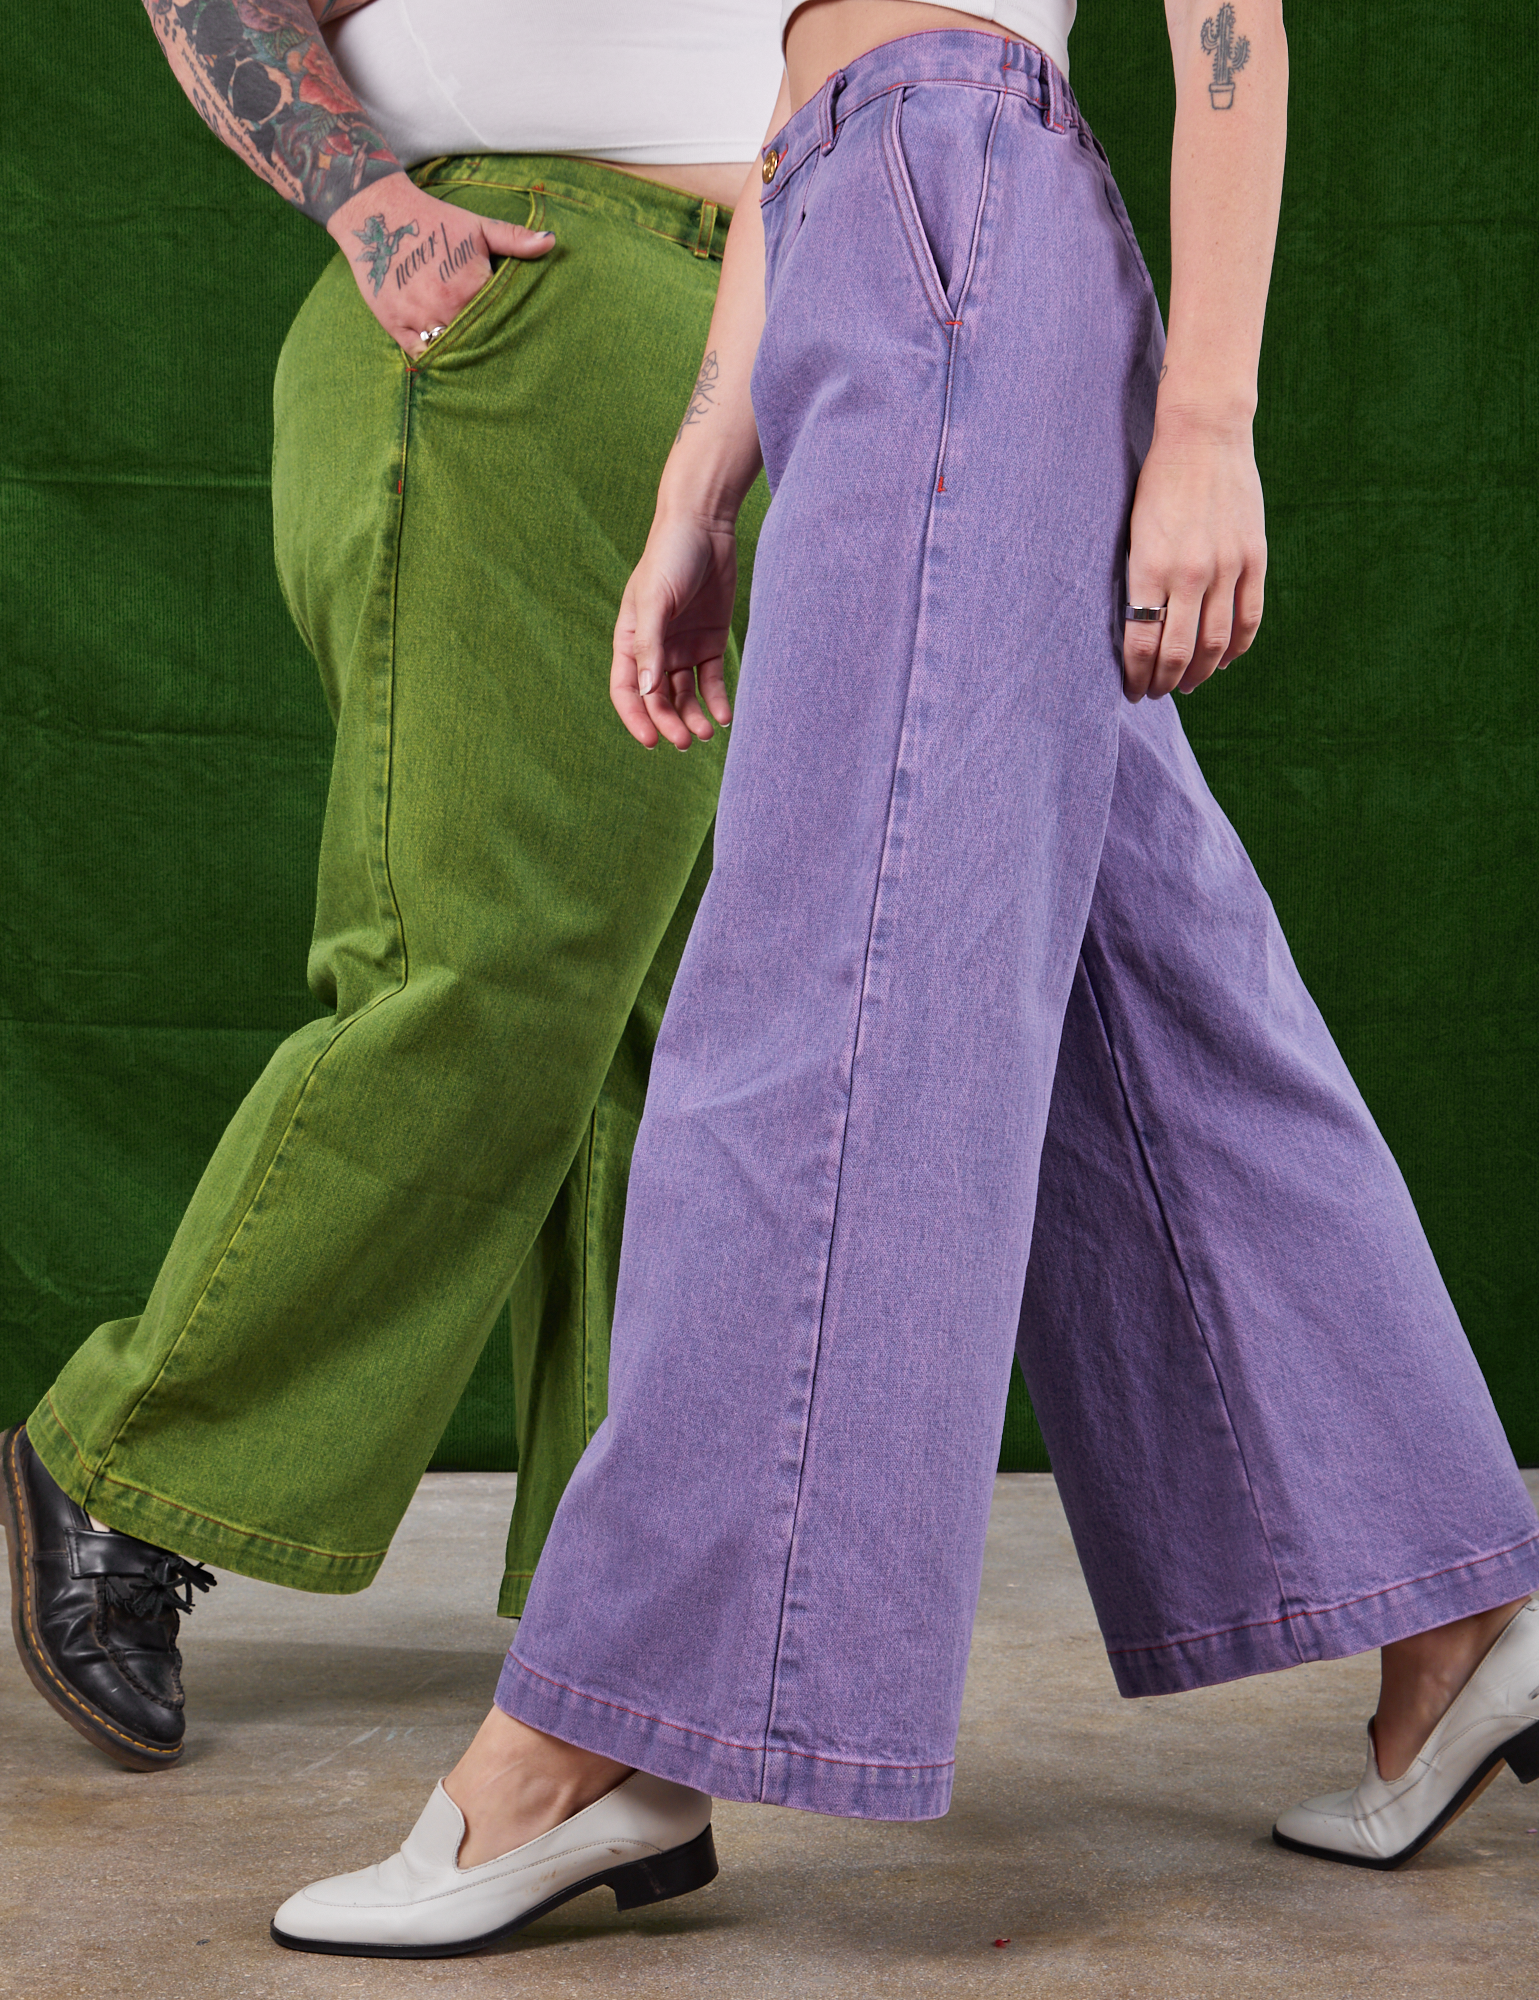 Sam is wearing Overdyed Wide Leg Trousers in Gross Green and Alex is wearing Overdyed Wide Leg Trousers in Faded Grape